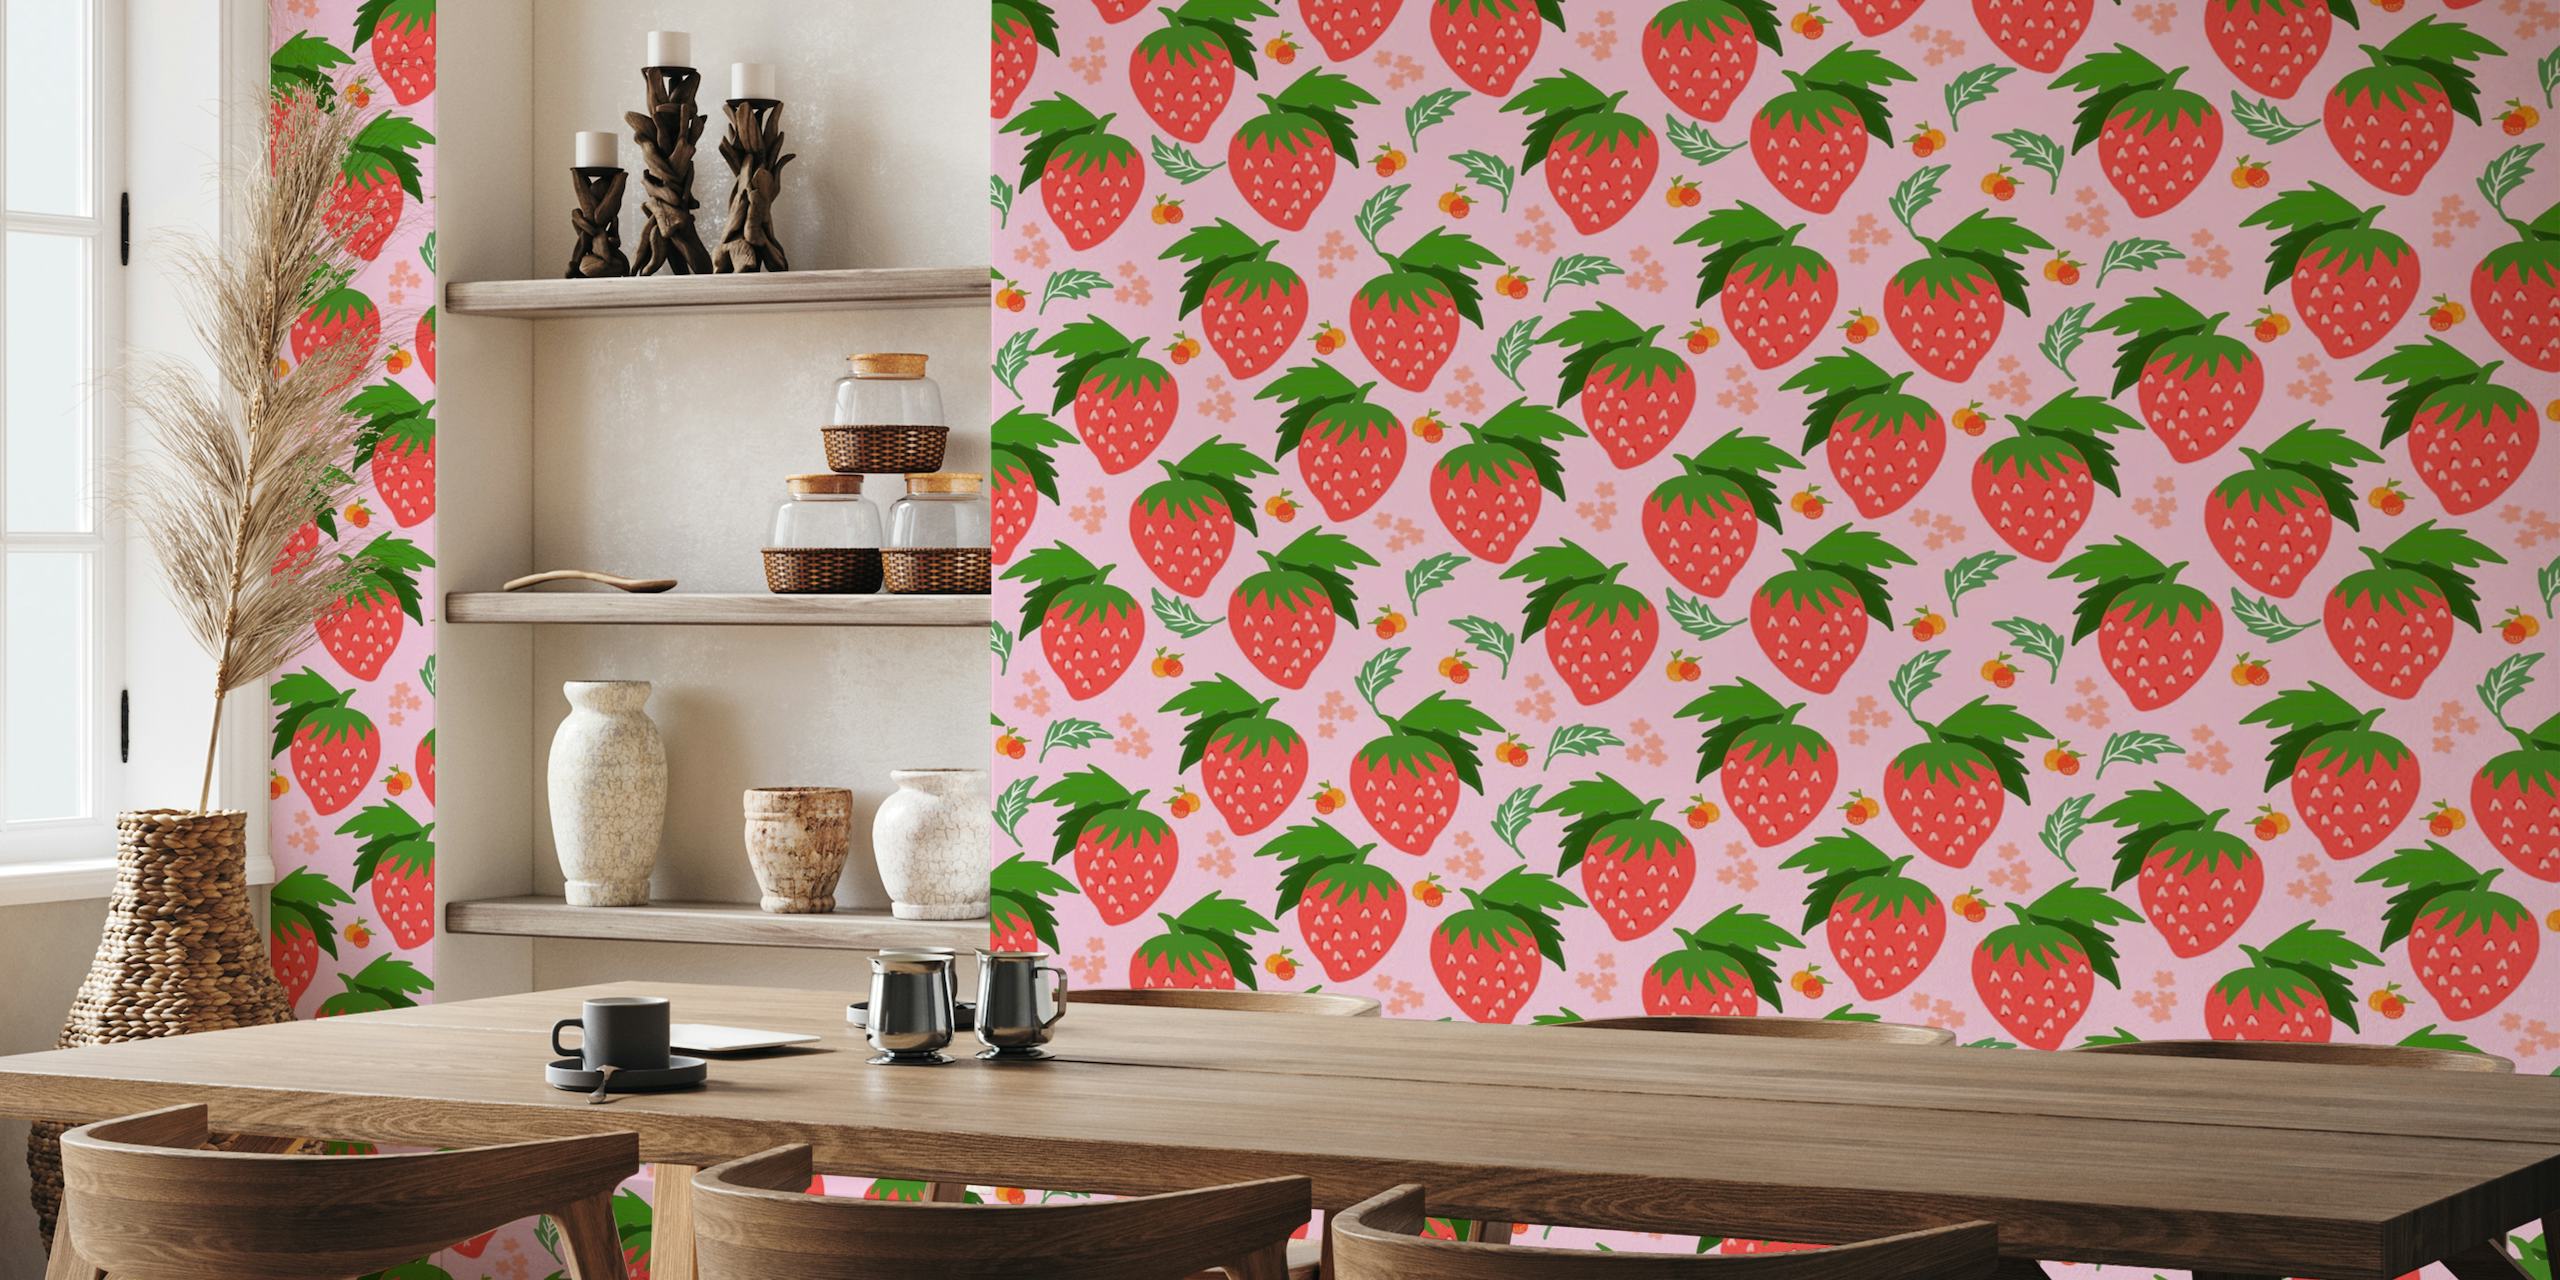 Strawberries and Pink fruit with leaves and elements kawaii style cute pattern papel de parede